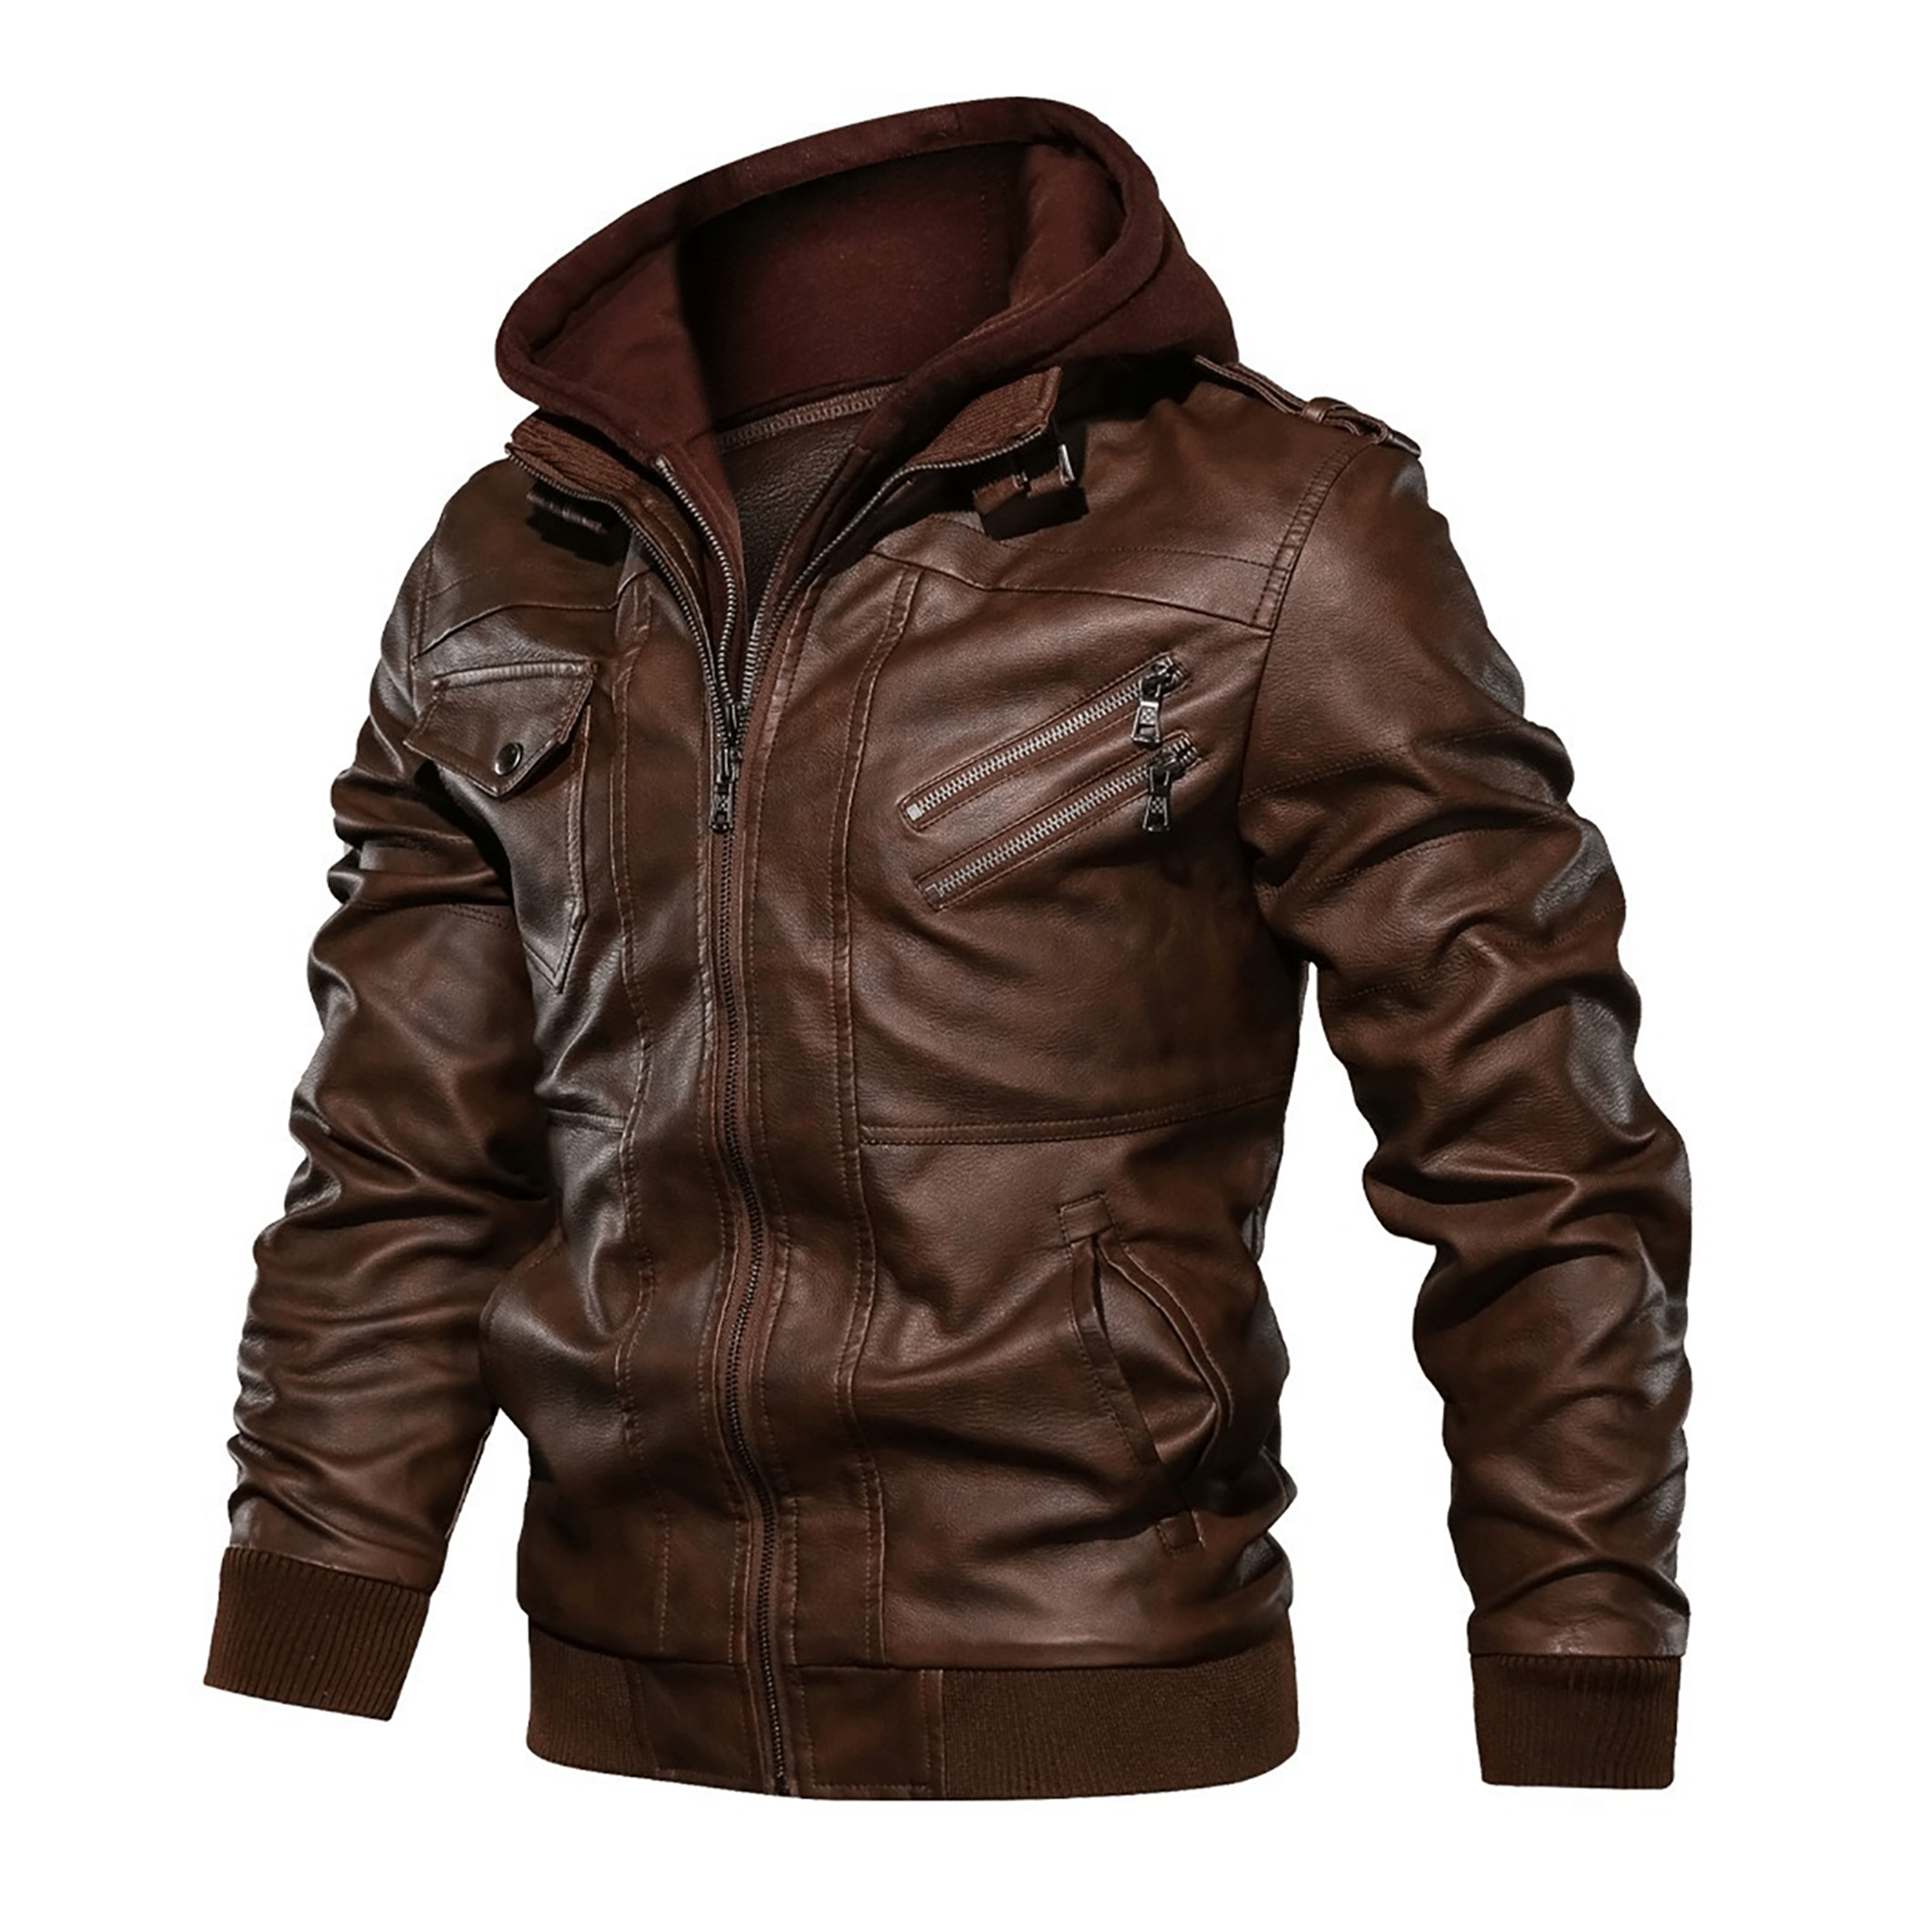 Top leather jackets and latest products 191